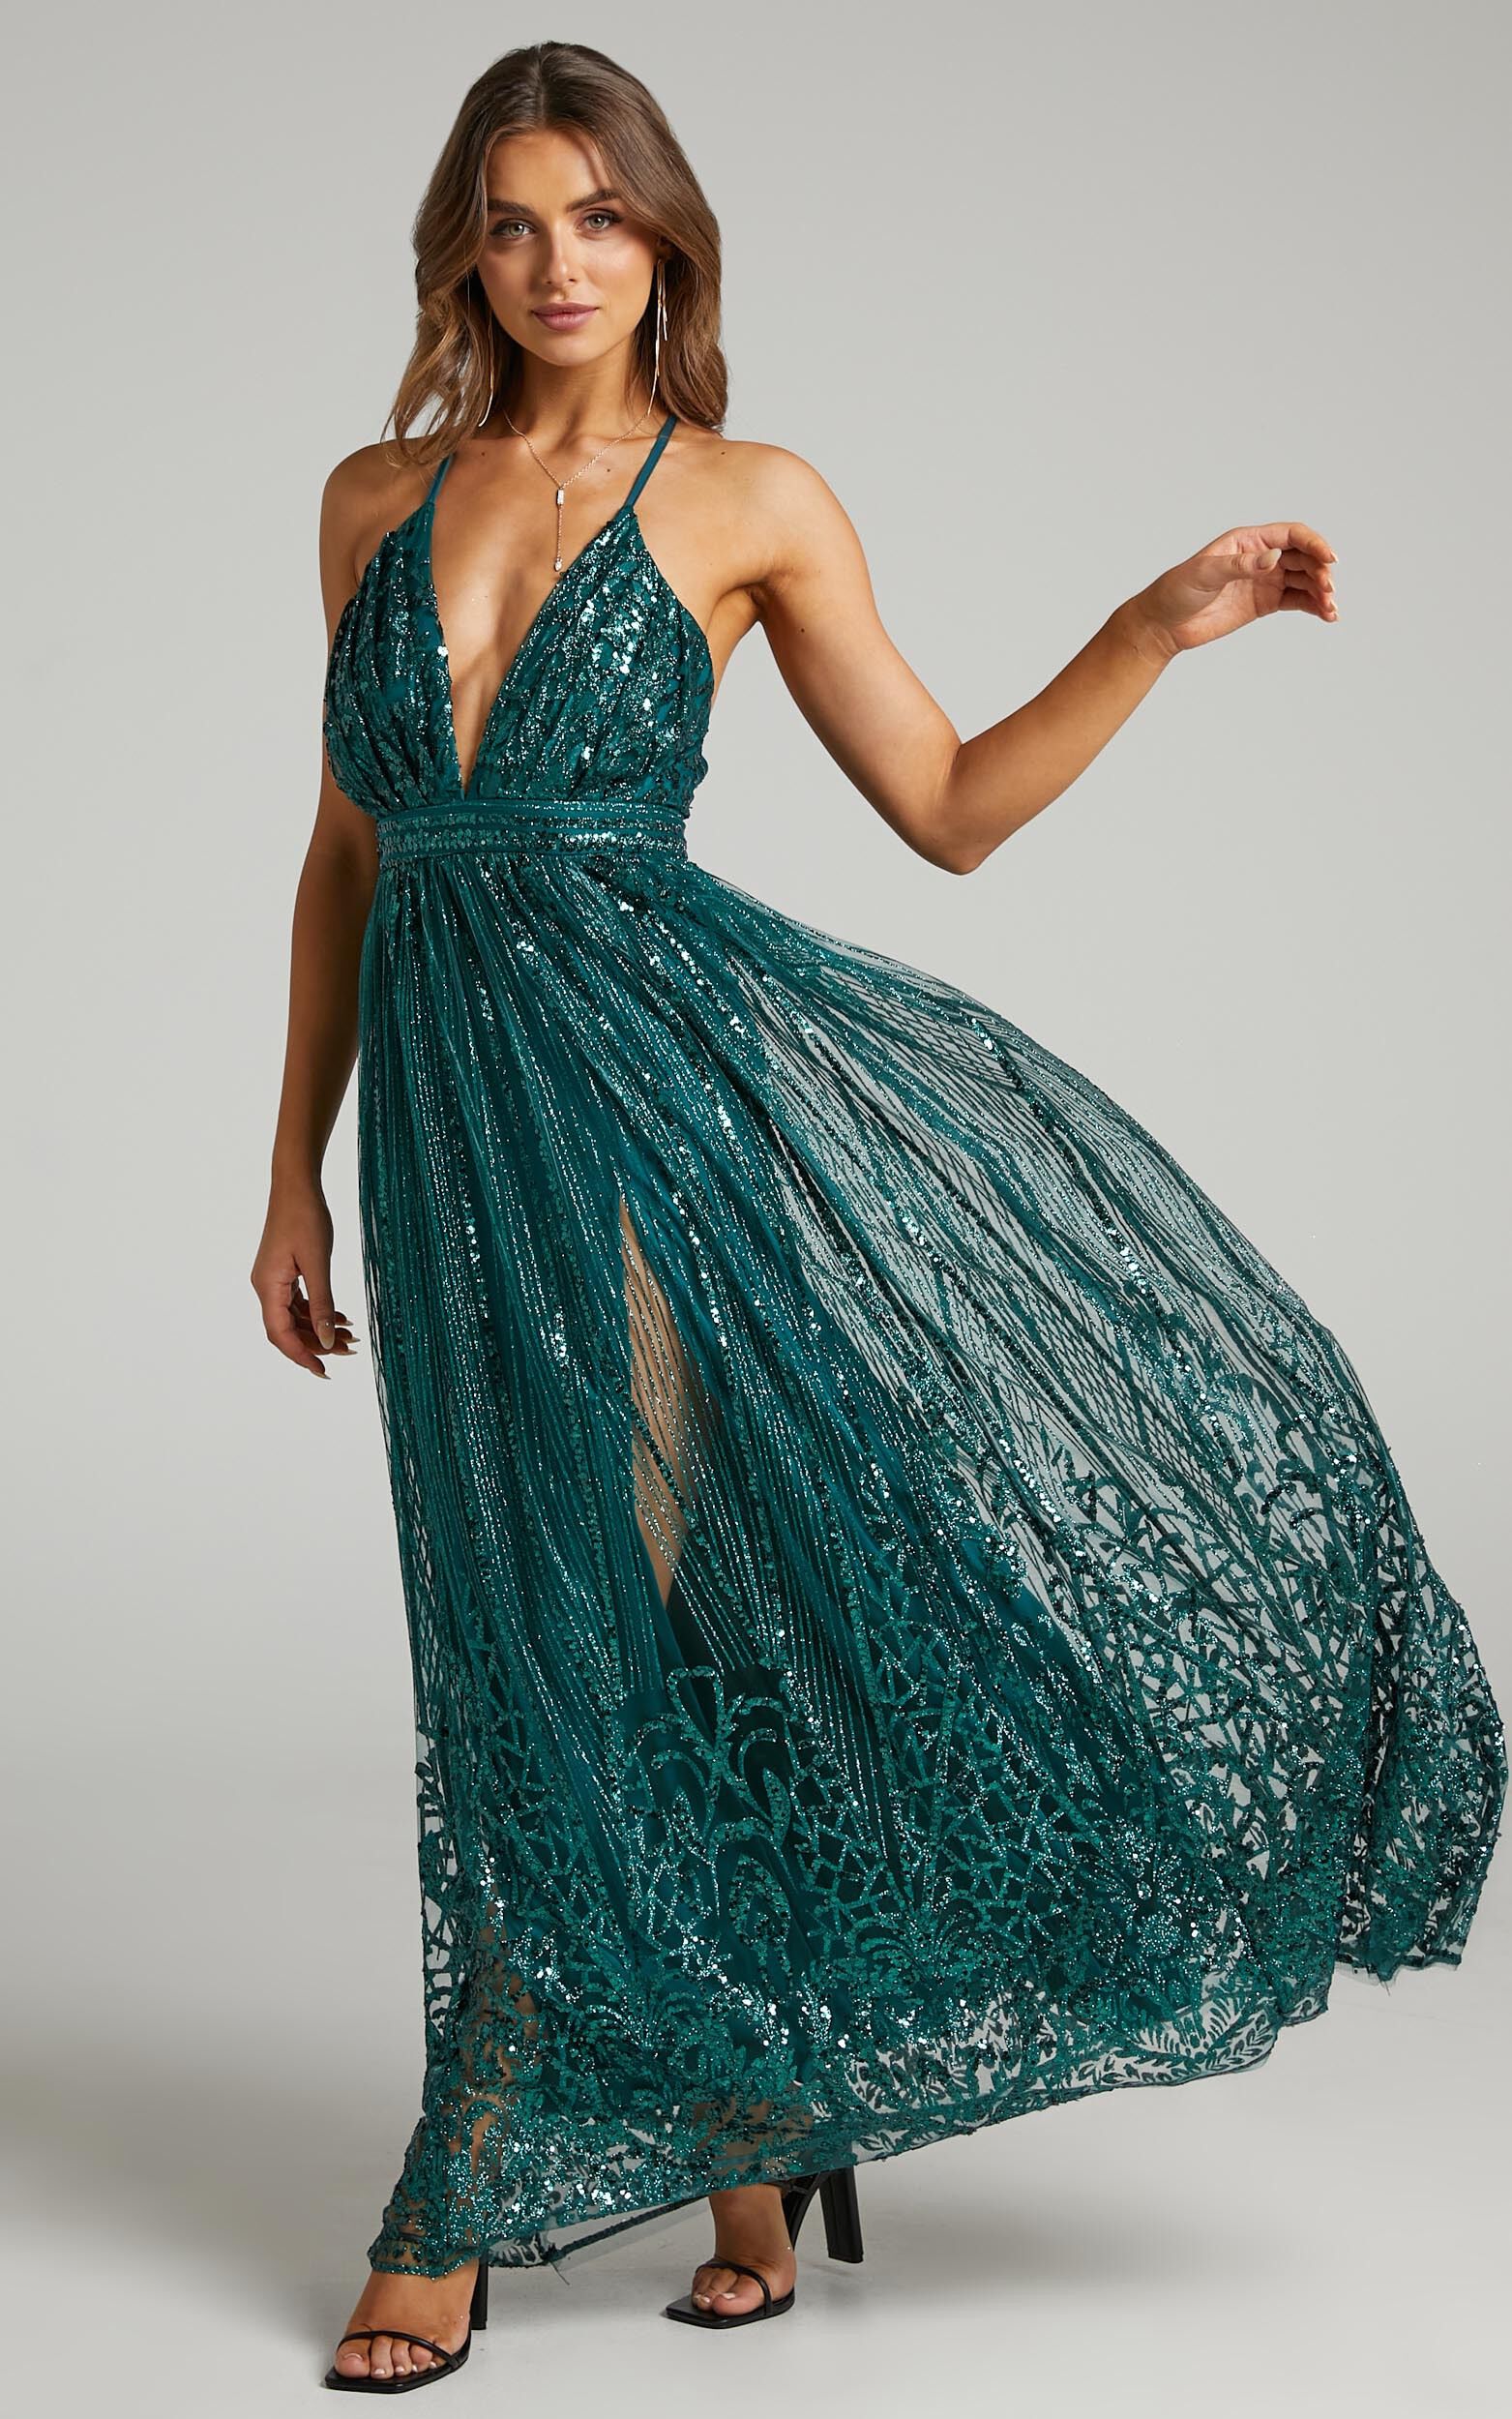 Paola Metallic Plunge Maxi Dress in Emerald - 04, GRN2, super-hi-res image number null